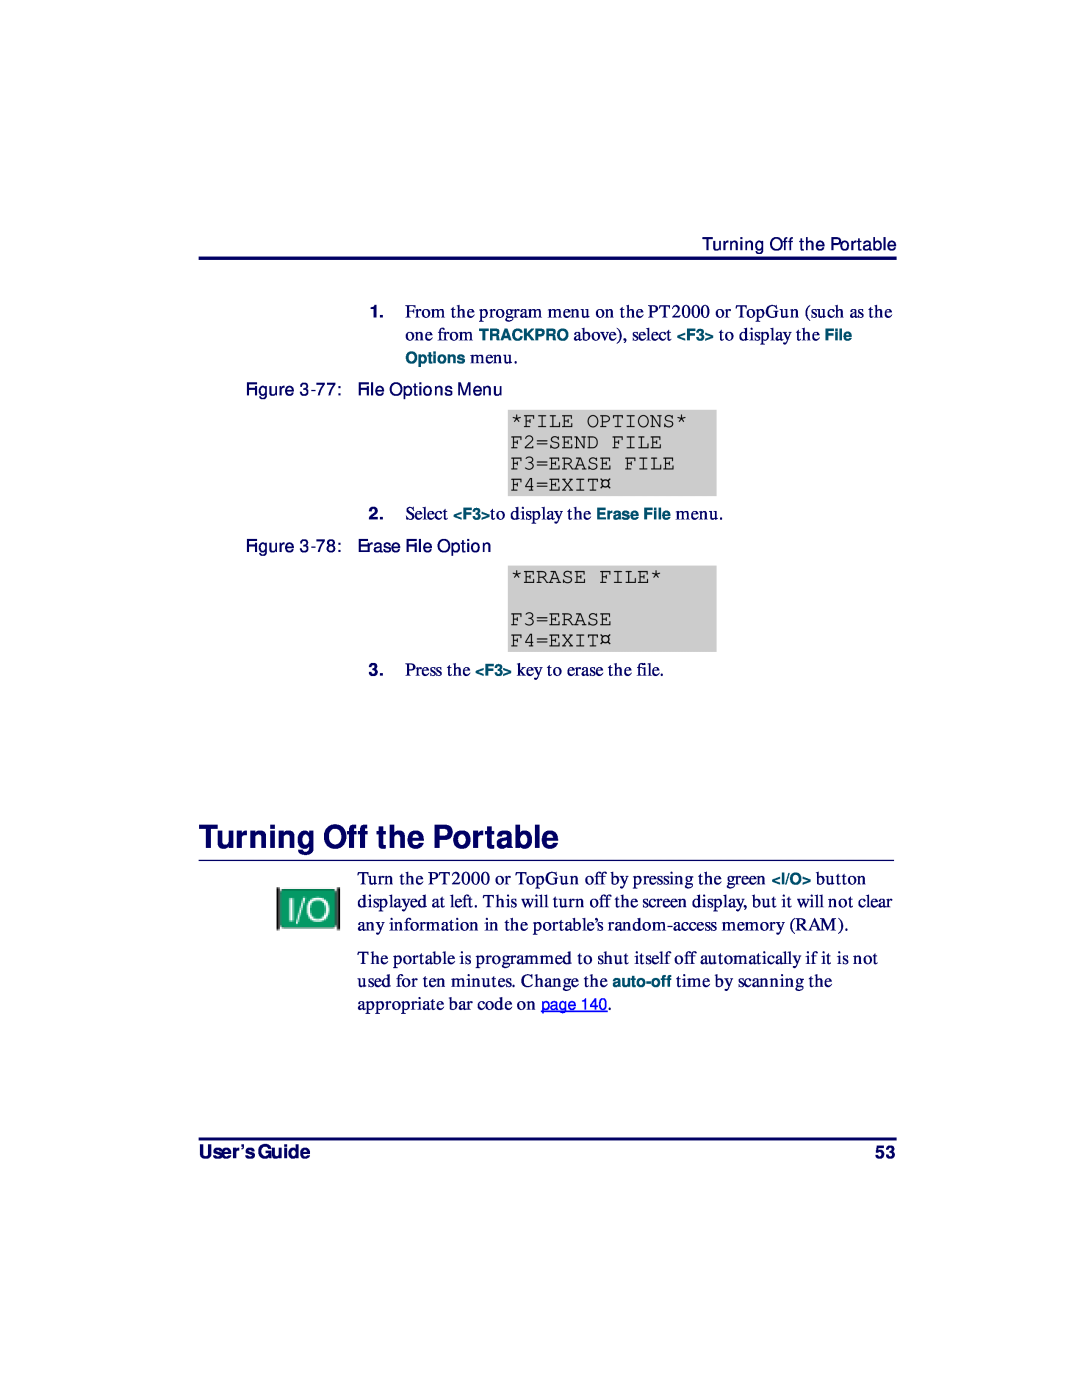 PSC PT2000, TopGun manual Turning Off the Portable, ERASE FILE F3=ERASE F4=EXIT¤, User’s Guide 